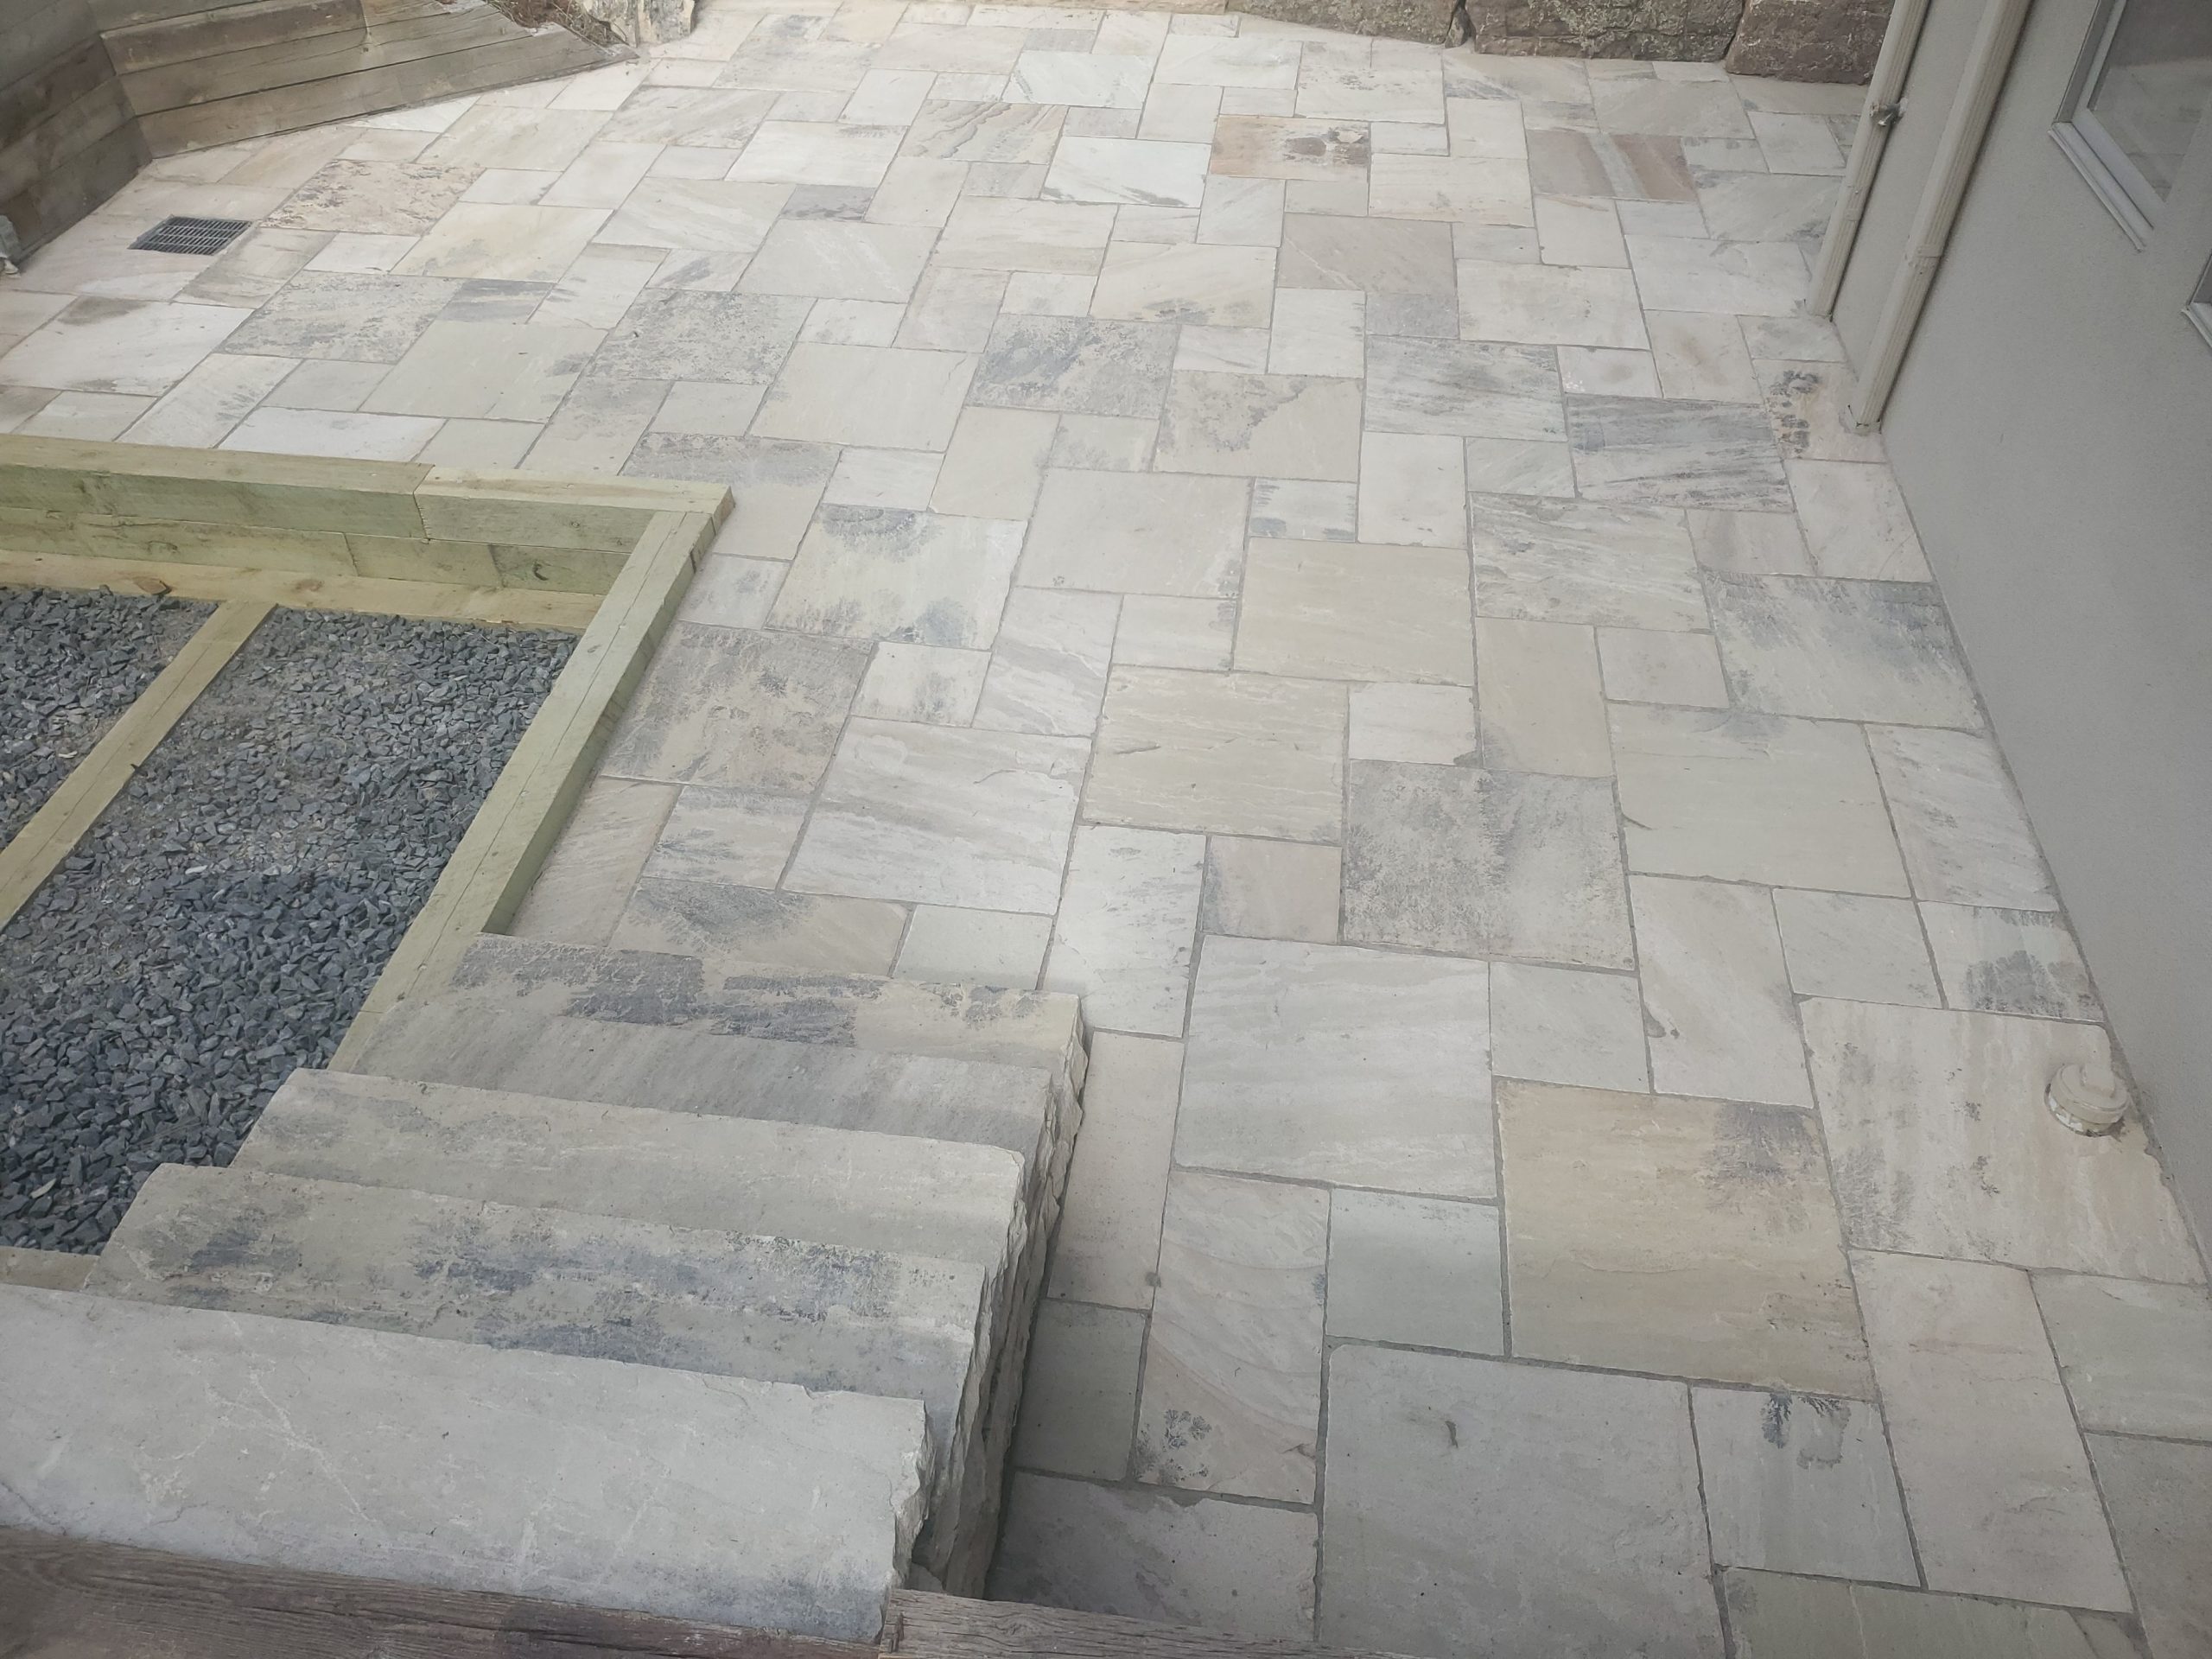 Square stone patio with inset garden beds next to staircase